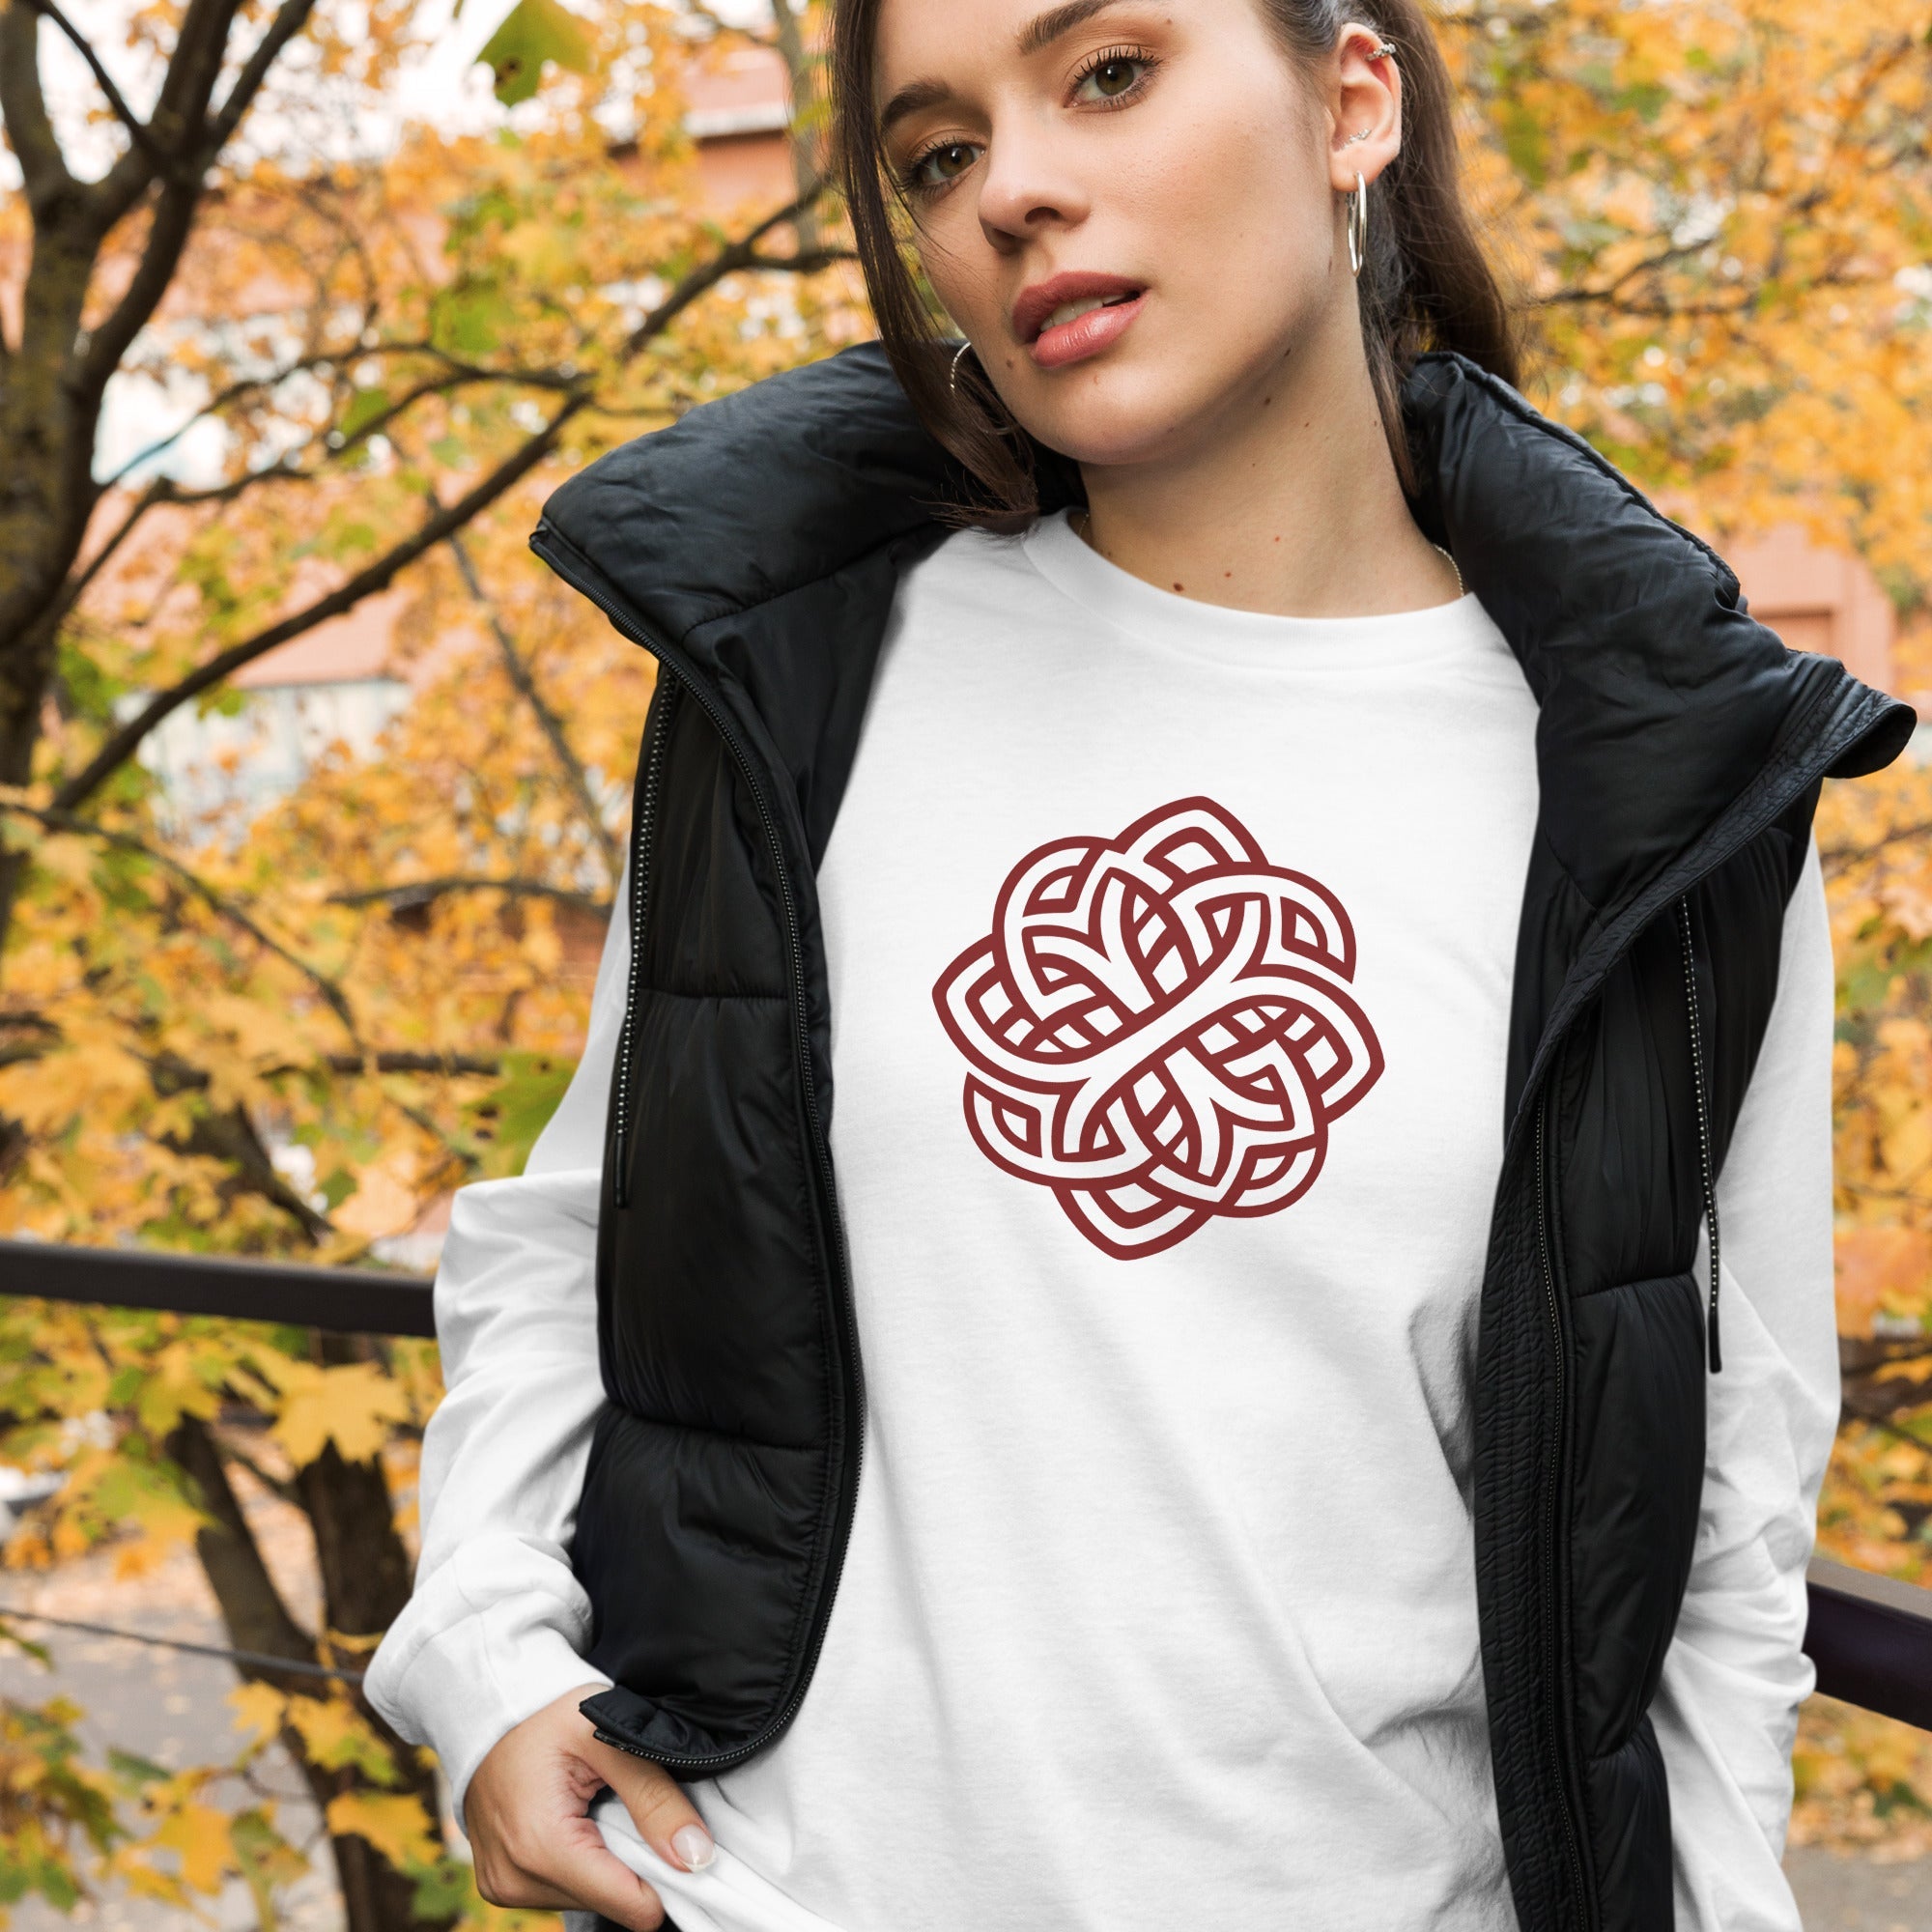 Celtic knot long sleeve tshirt featuring artistic line art of interwoven oak tree roots. Made of soft, 100% cotton, breathable, classic crew neck and long sleeves for a regular fit. This tee is ideal for daily wear. Strength, wisdom, and endurance.